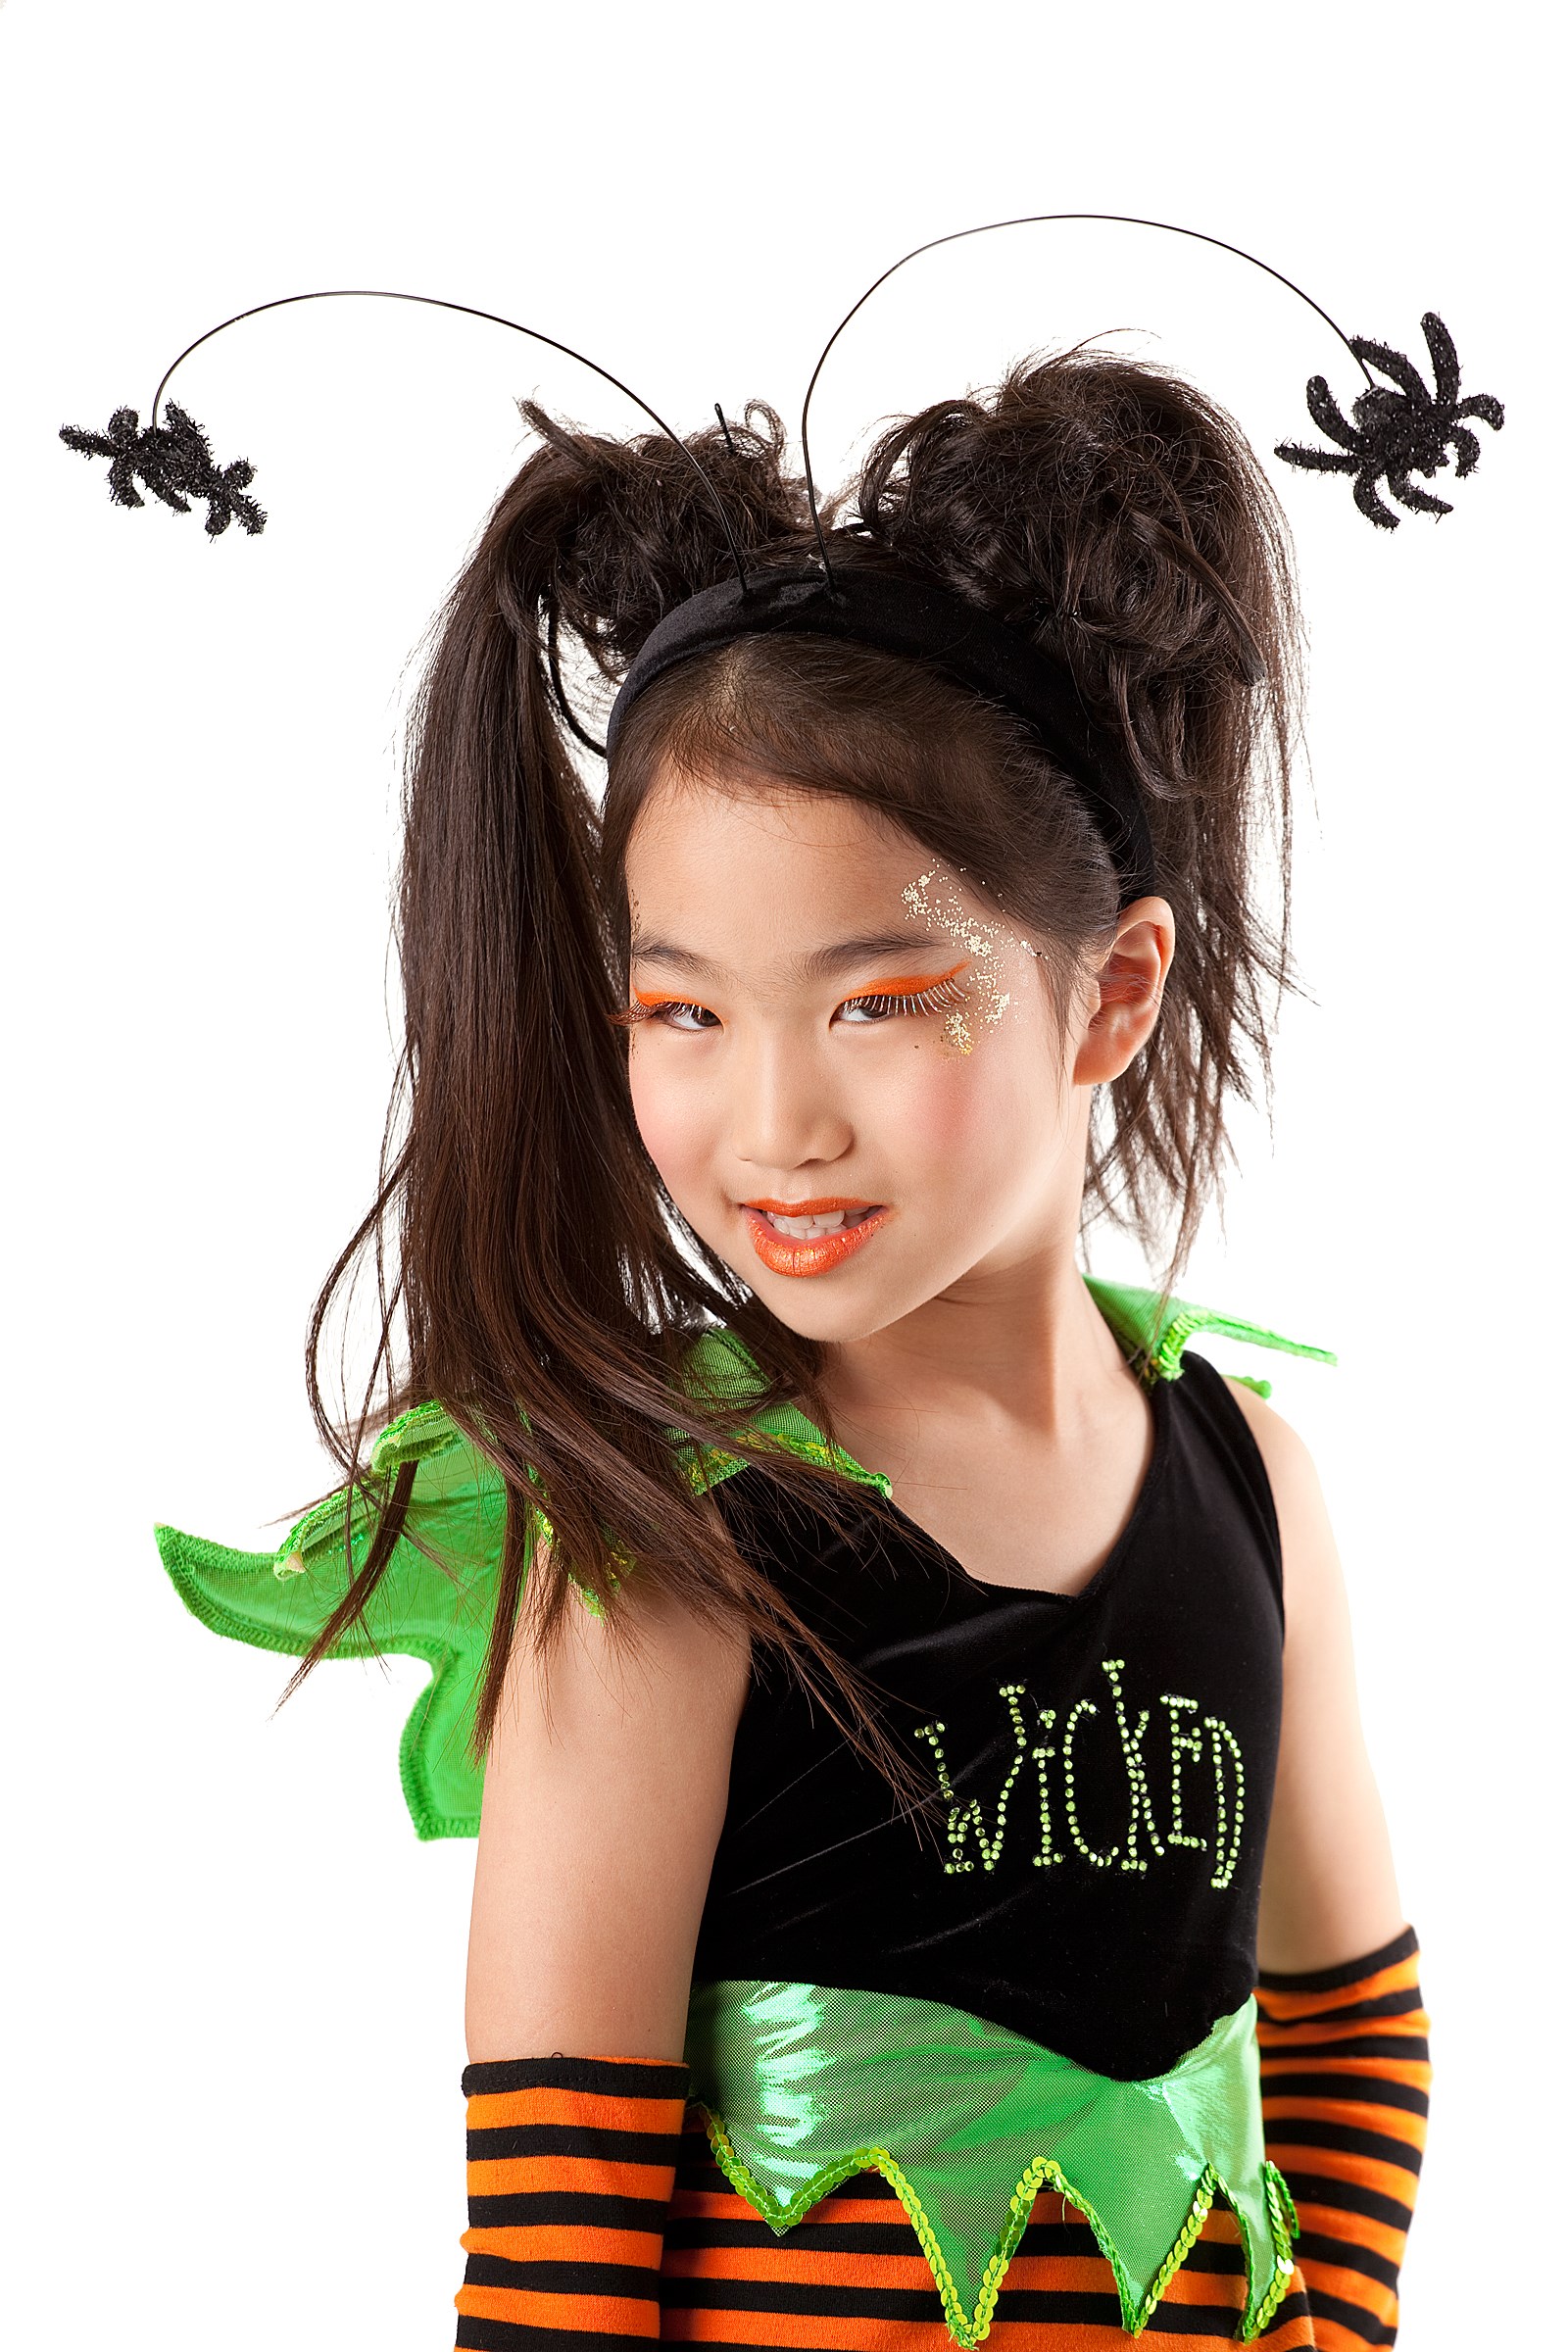 Wicked Witch Child Headband - One Size Fits Most Kids